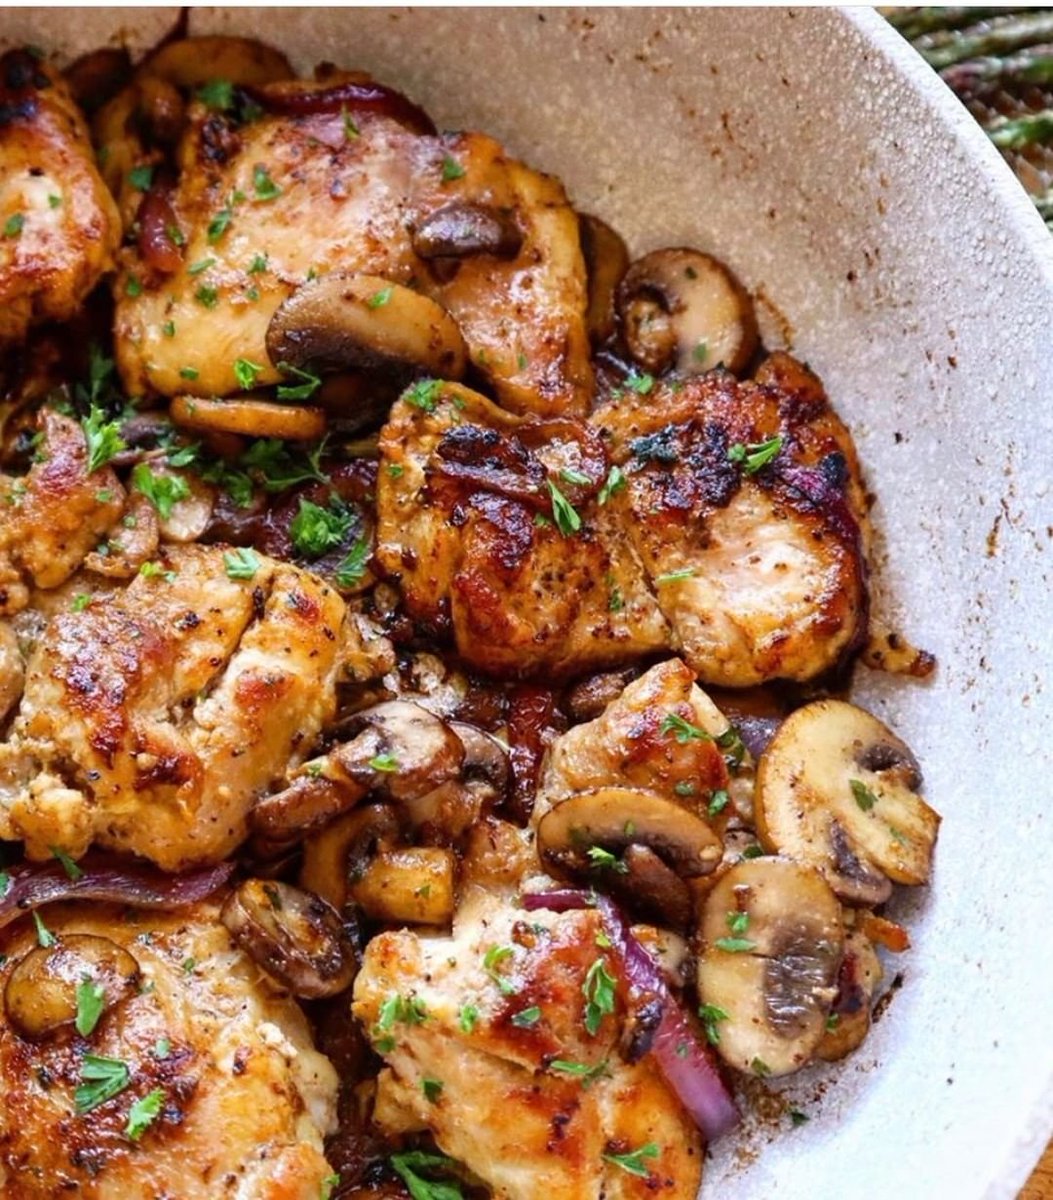 KETO GARLIC CHICKEN SKILLET 🔥🔥🤤 
One pan, lots of garlic, and a hell of a lot of flavour!⁠
#keto #ketorecipes #ketogenic #ketodiet #theketobible #ketolifestyle #lowcarb #ketogenicdiet #onepanmeals #ketoskillet